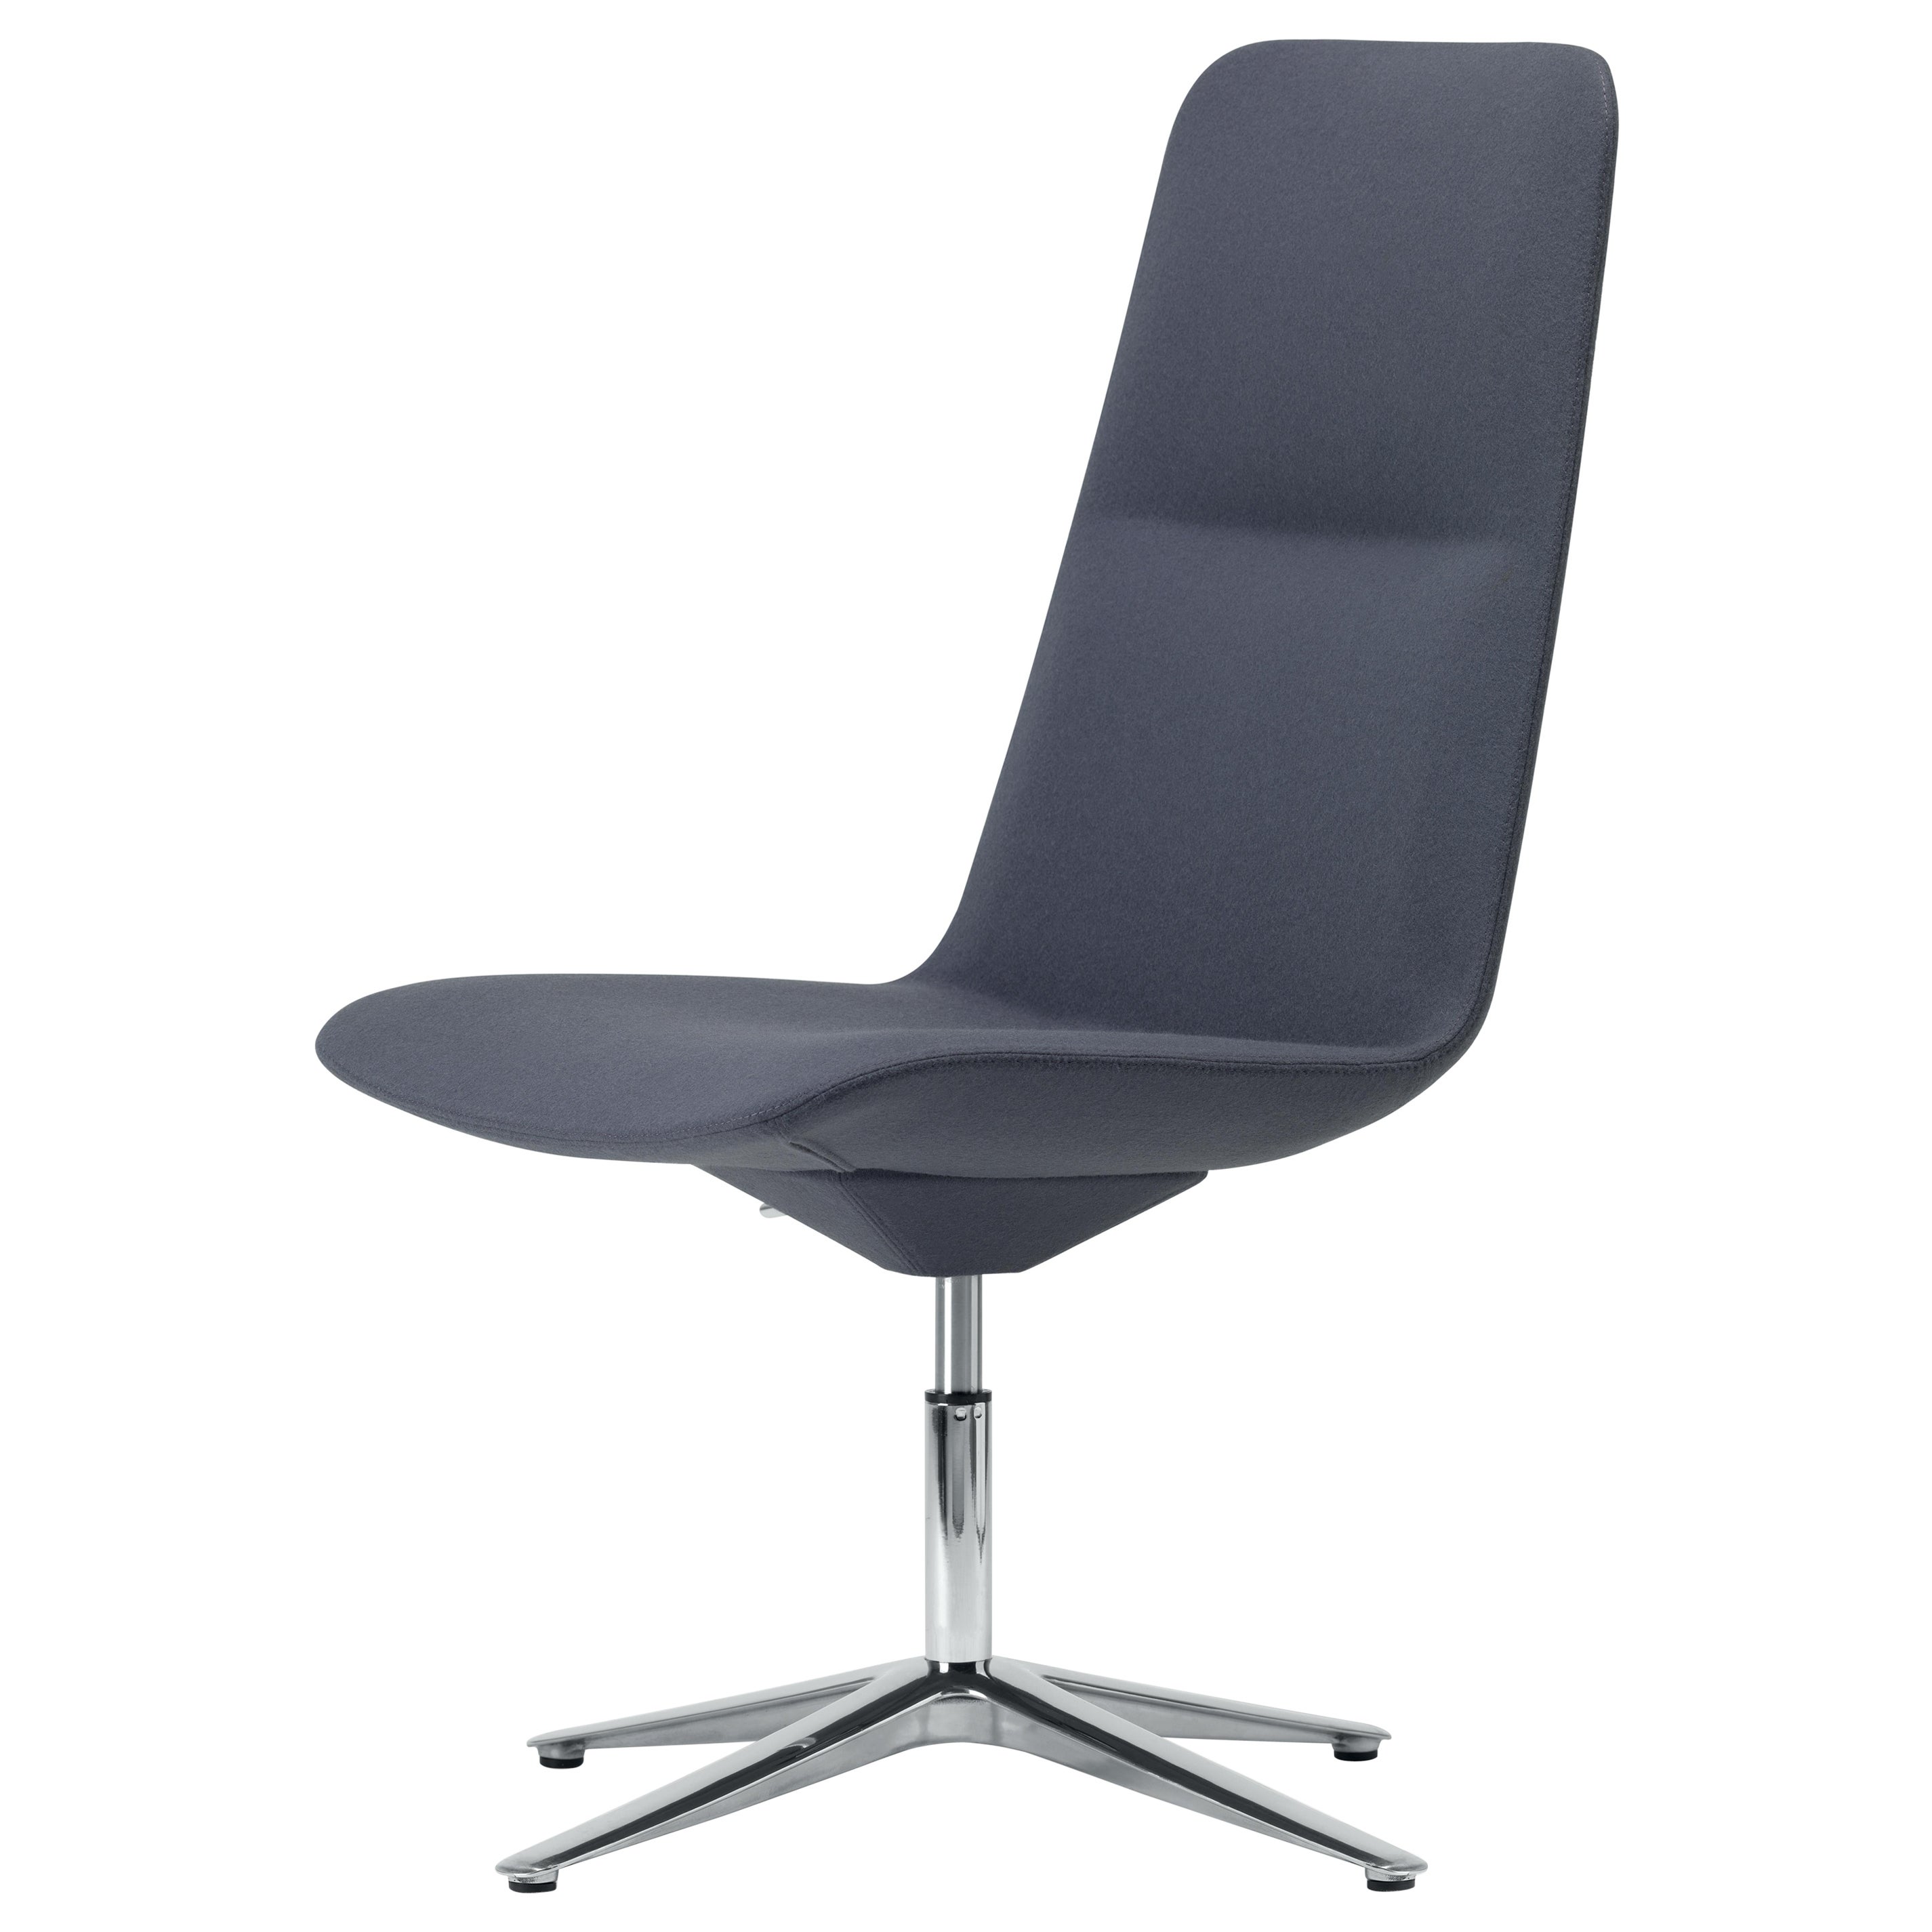 Alias 807 Slim Conference Medium 4 Chair in Grey Seat & Polished Aluminum Frame For Sale